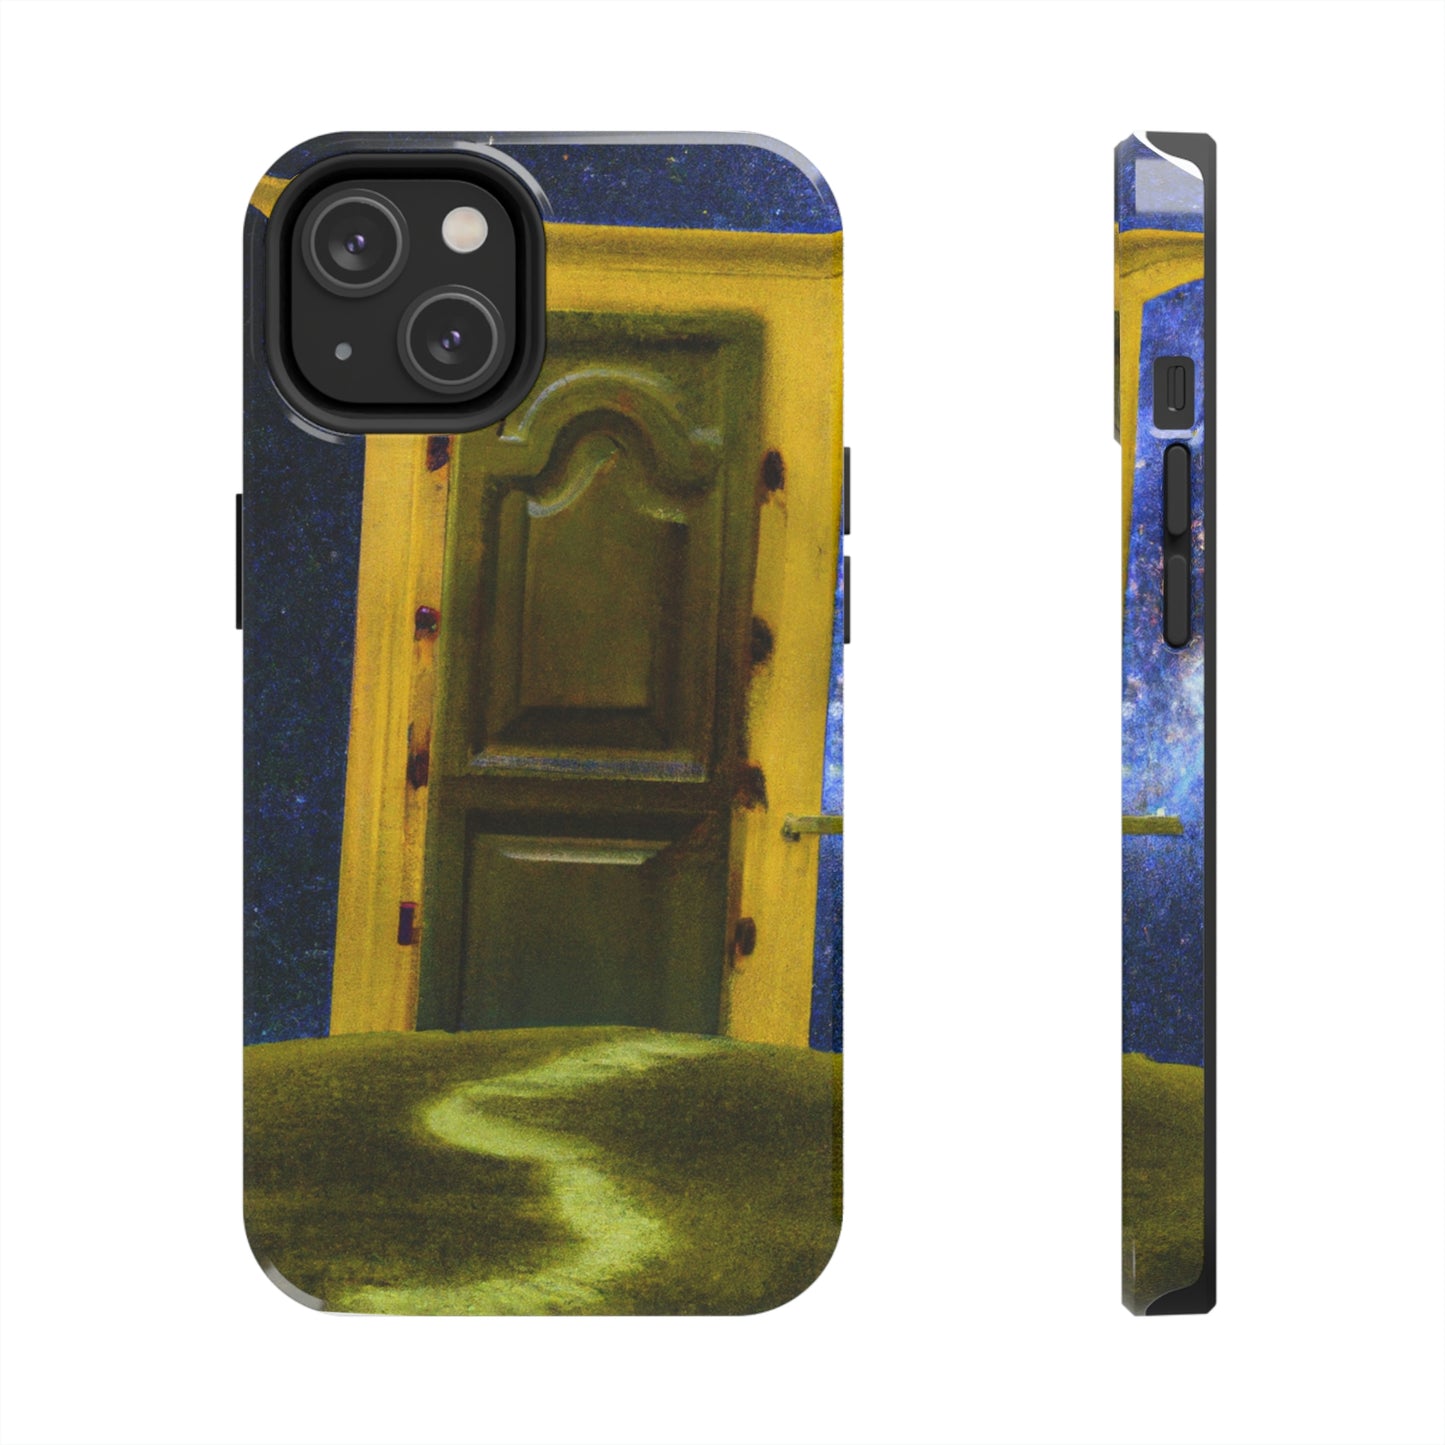 The Heavenly Threshold - The Alien Tough Phone Cases